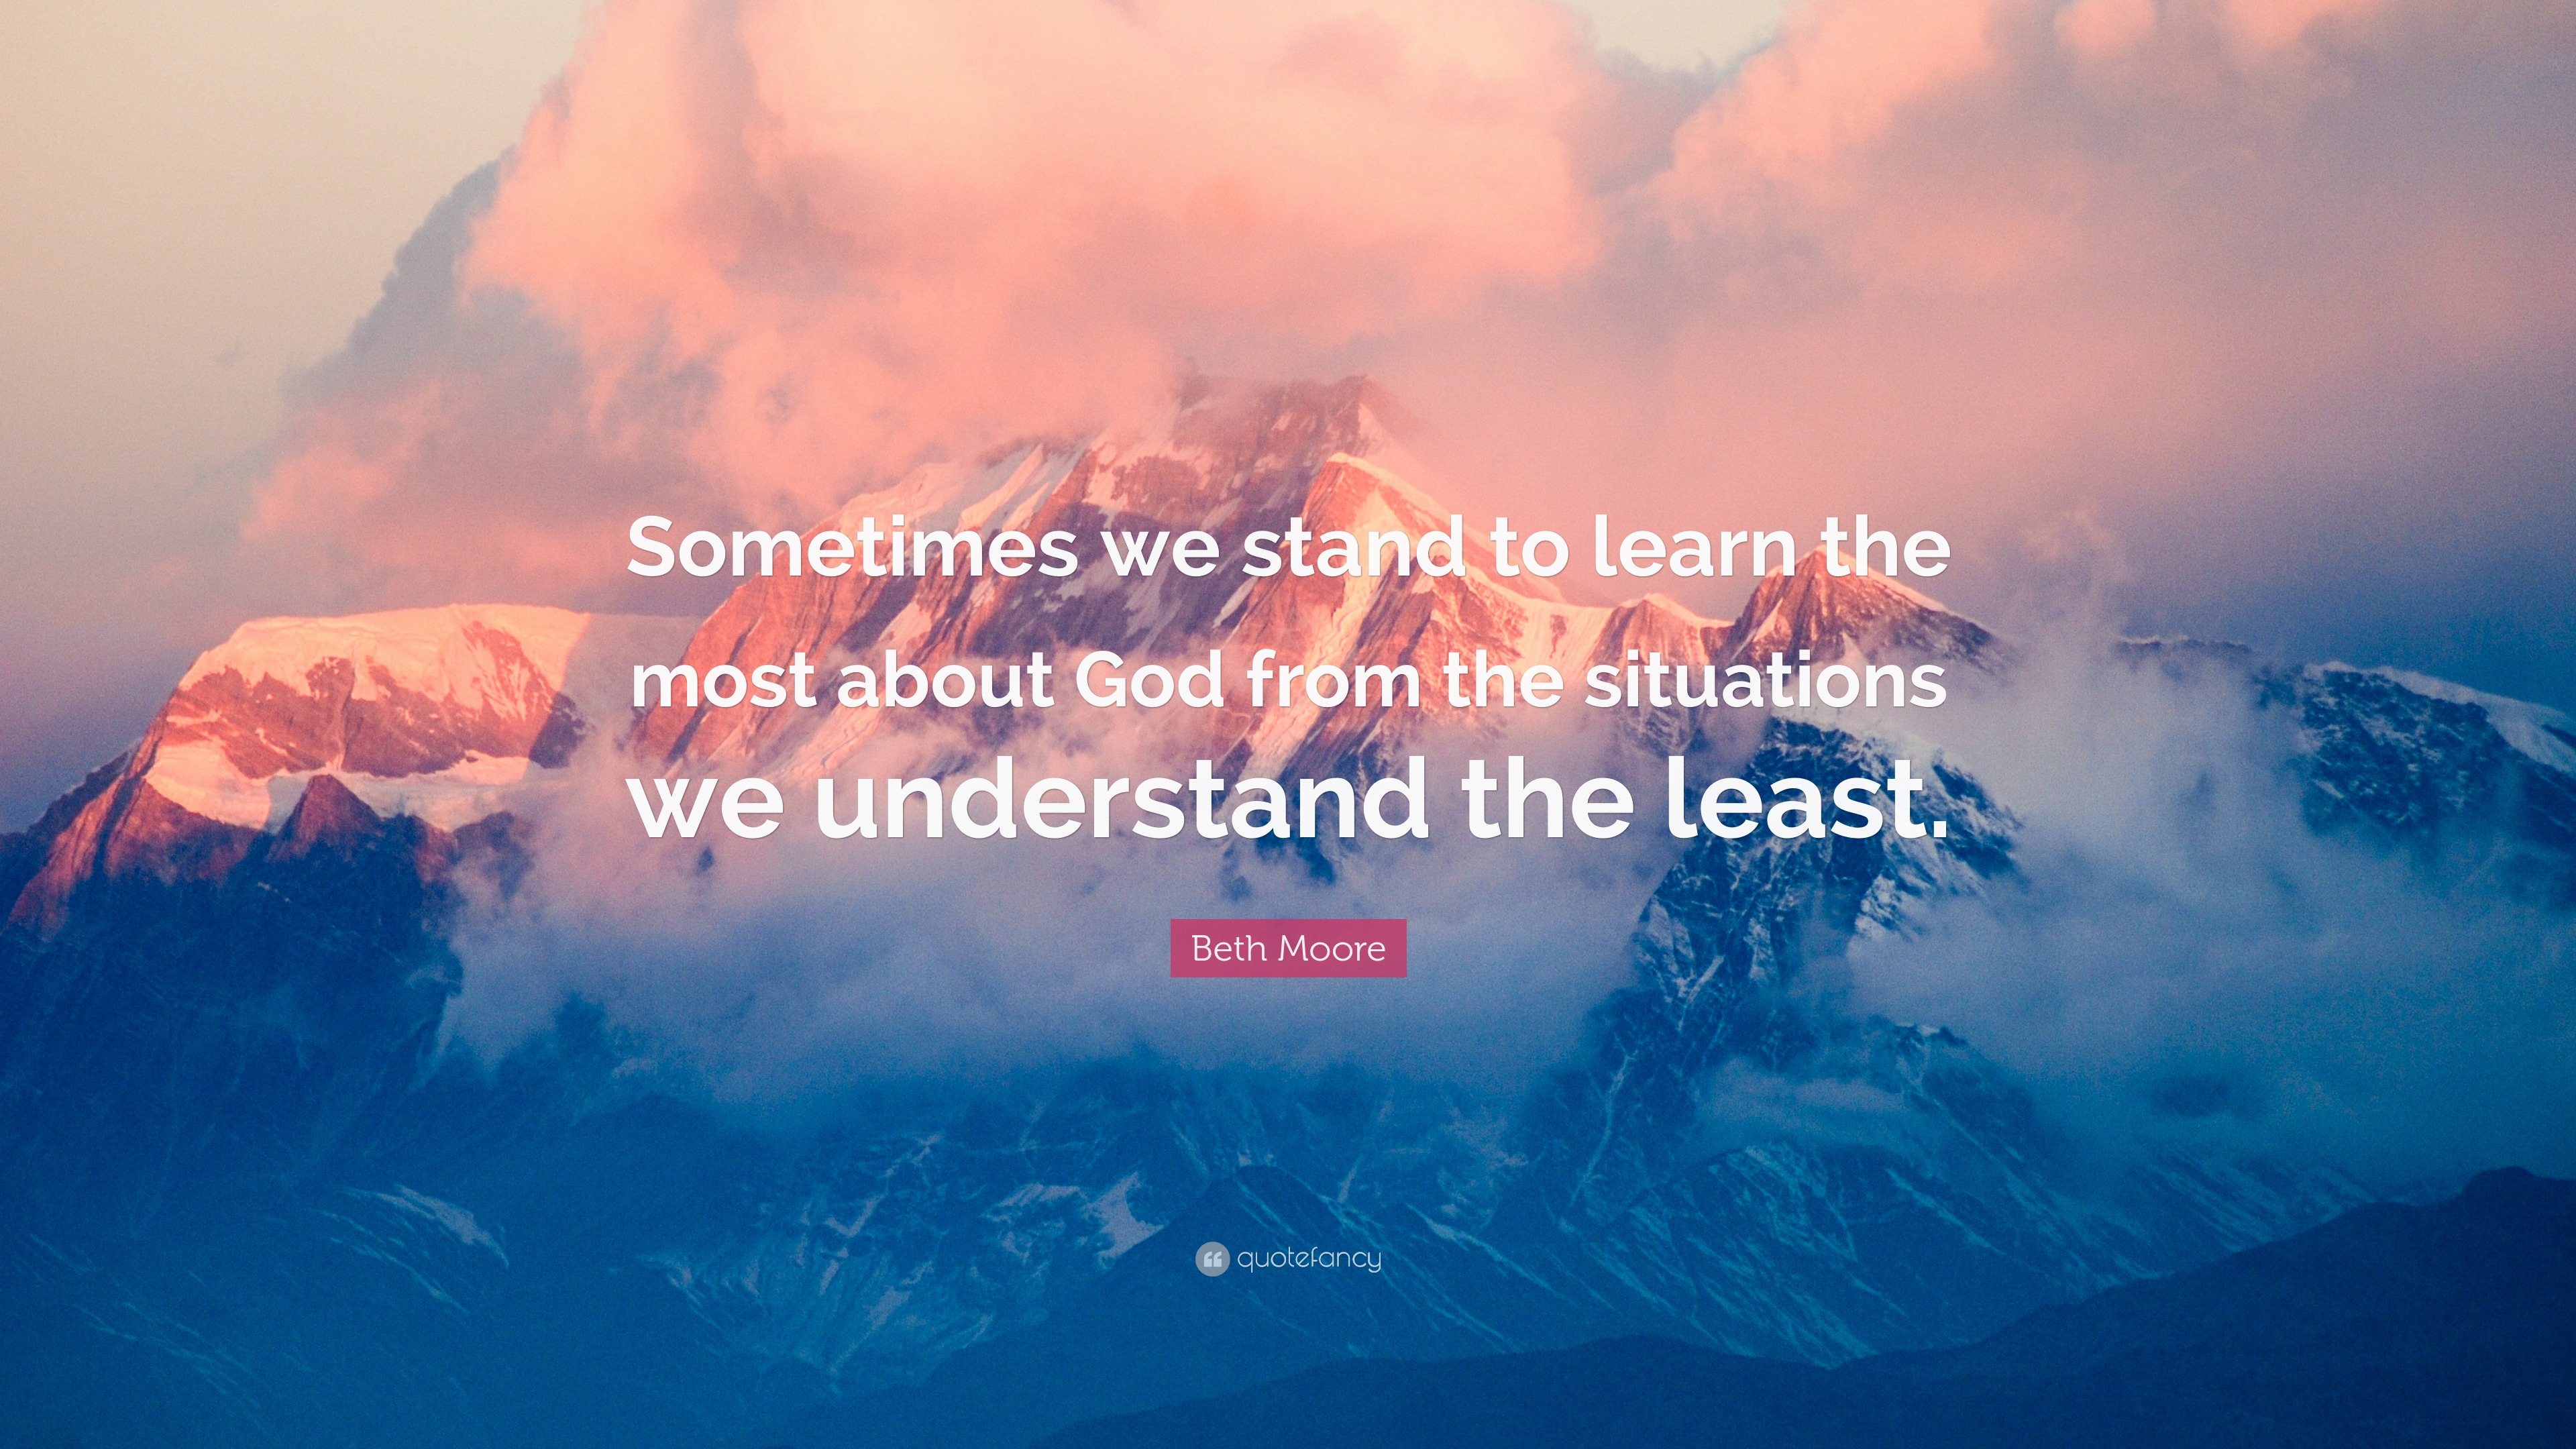 Beth Moore Quote: “Sometimes we stand to learn the most about God from ...